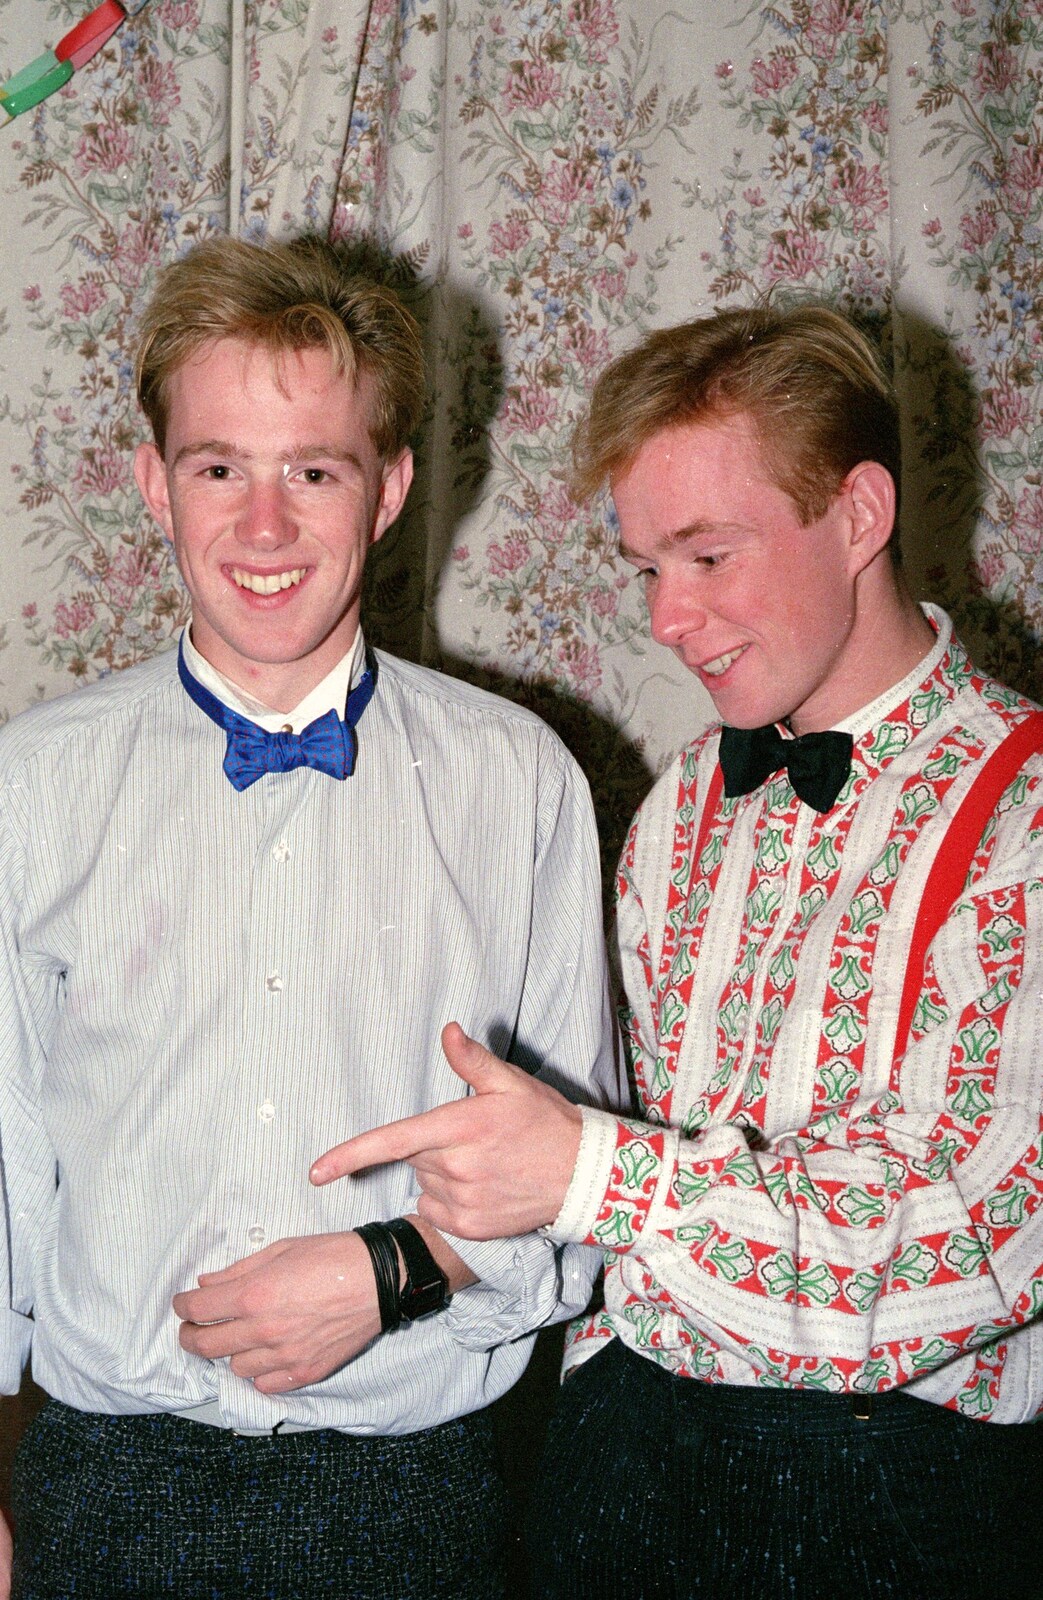 Martin and his twin brother from A Valentine Street Christmas, Norwich, Norfolk - 17th December 1987